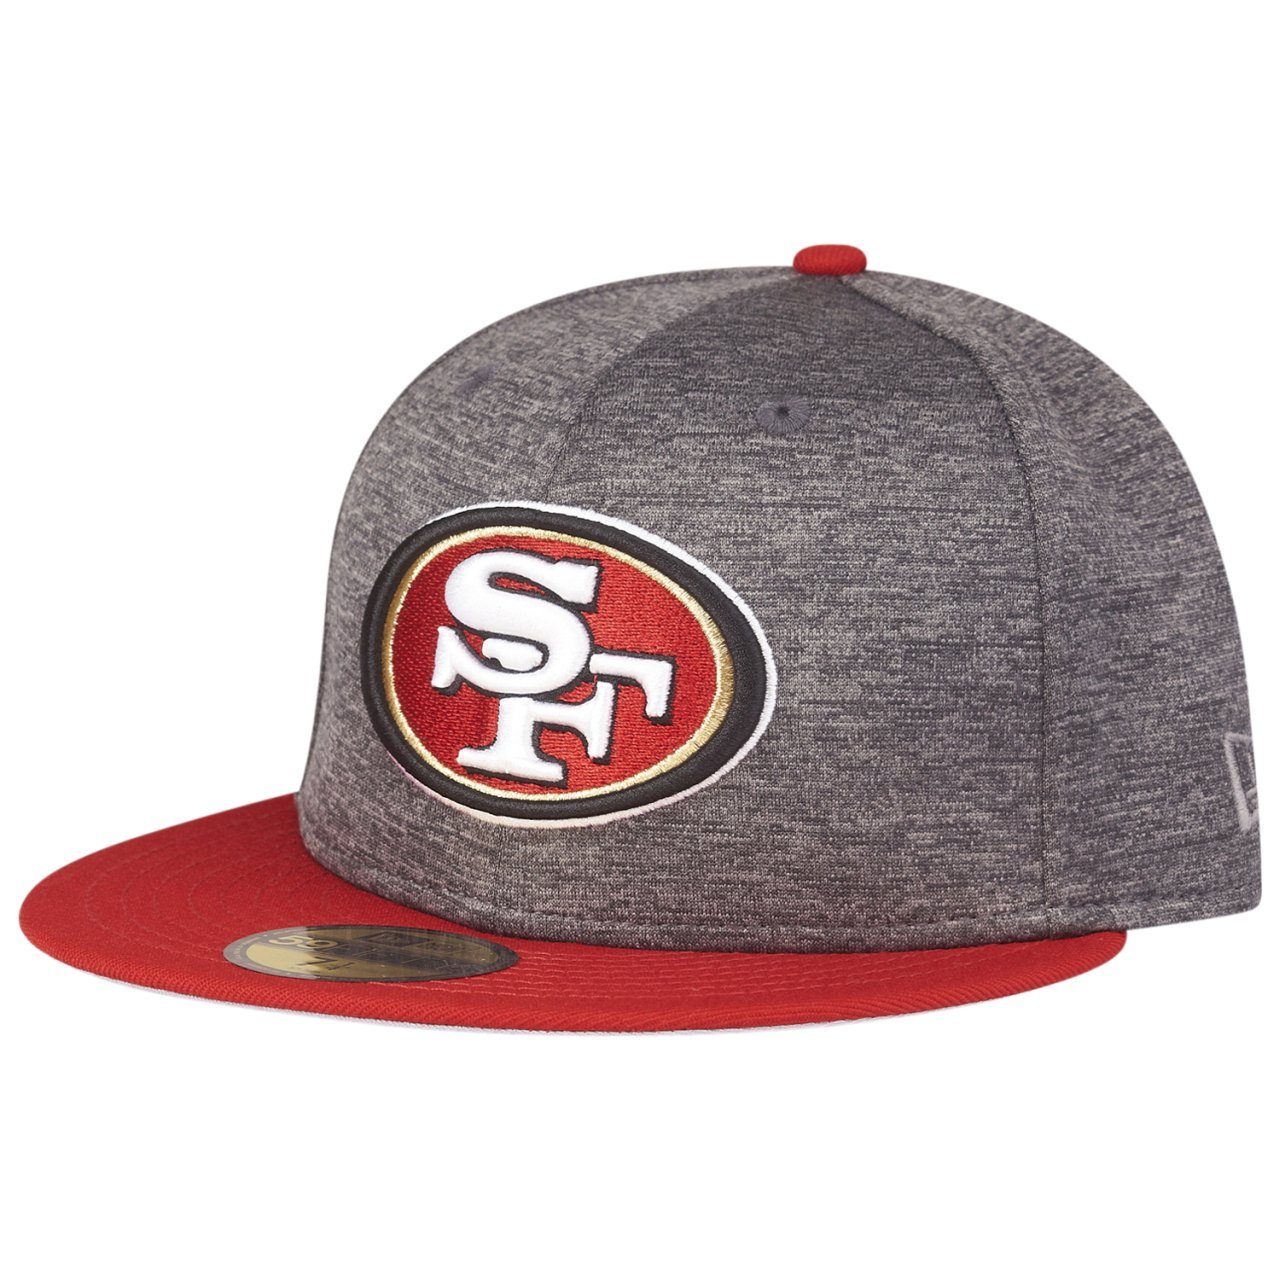 New Era Fitted Cap 49ers 59Fifty Francisco San SHADOW TECH